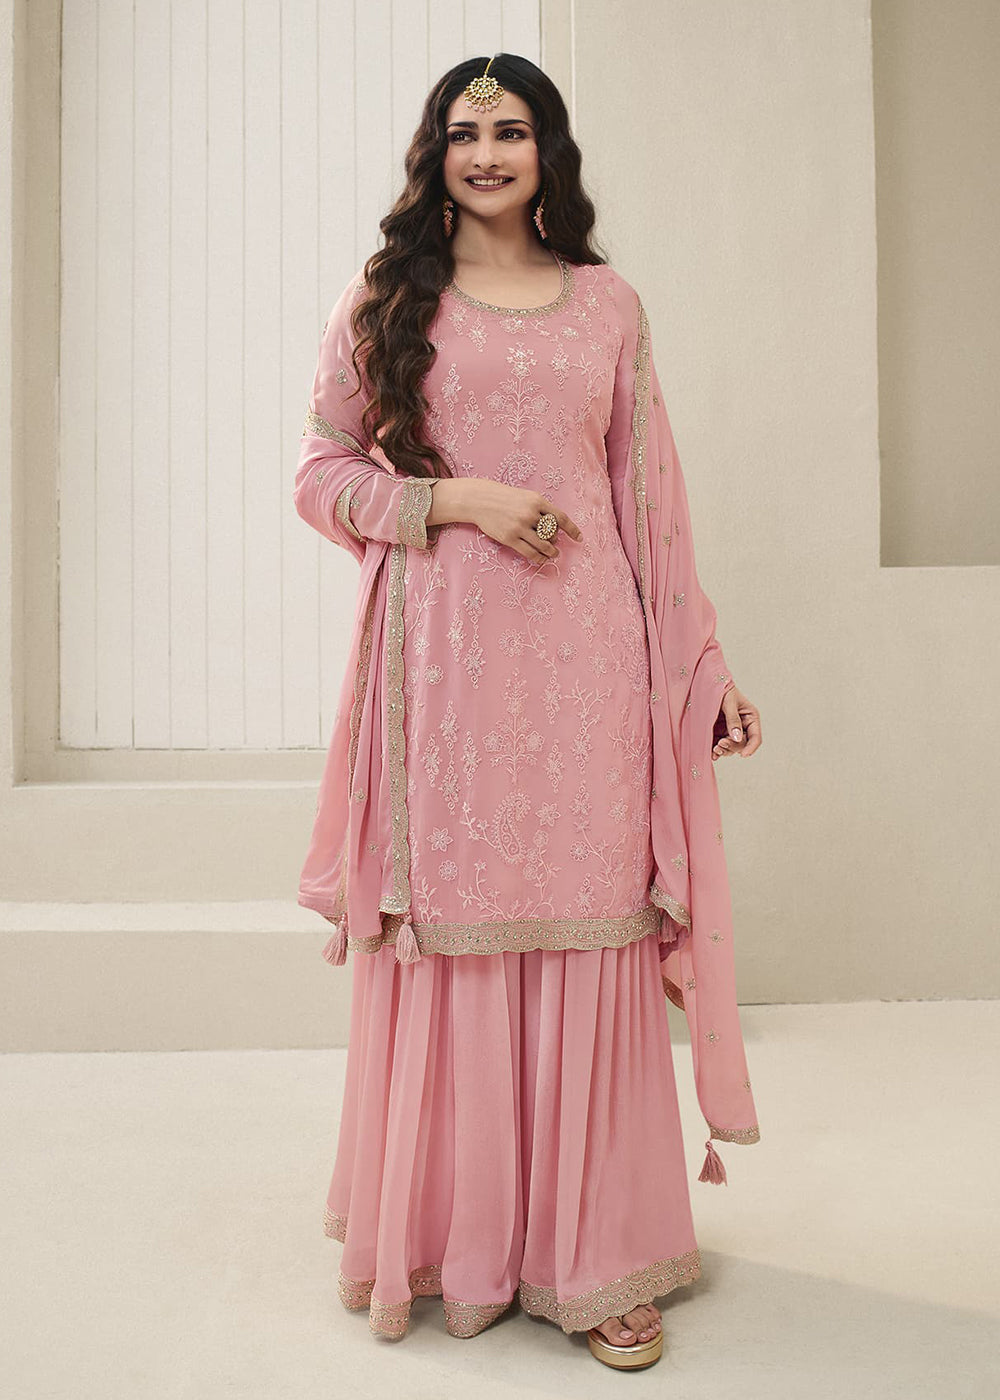 Shop Now Prachi Desai Soft Pink Organza Embroidered Sharara Suit Online at Empress Clothing in USA, UK, Canada, Italy & Worldwide.